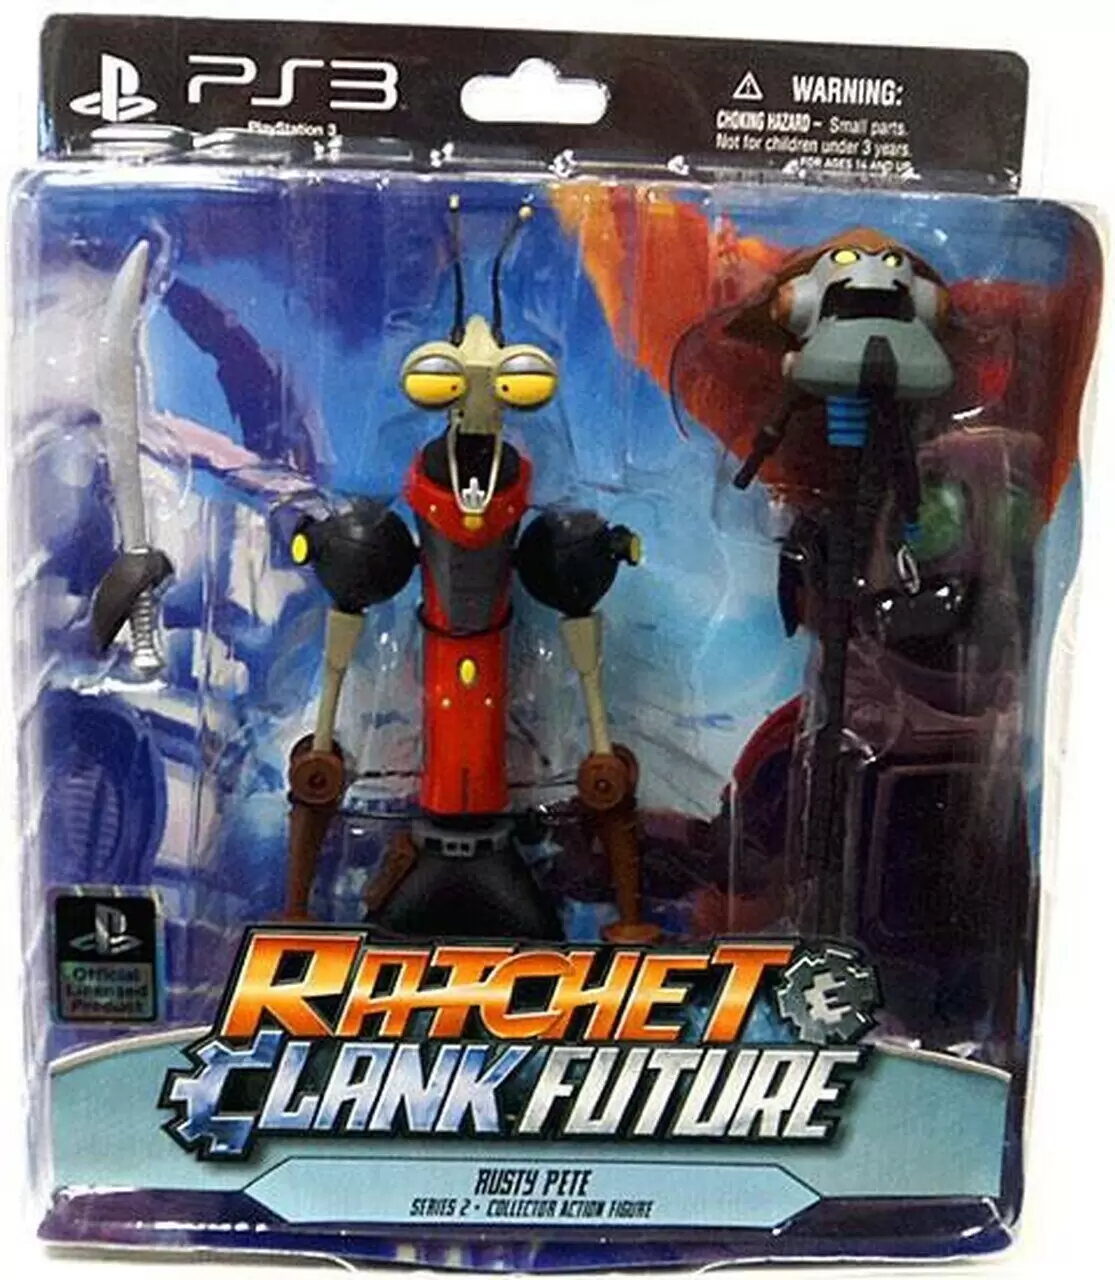 Ratchet and Clank Future - Rusty Pete